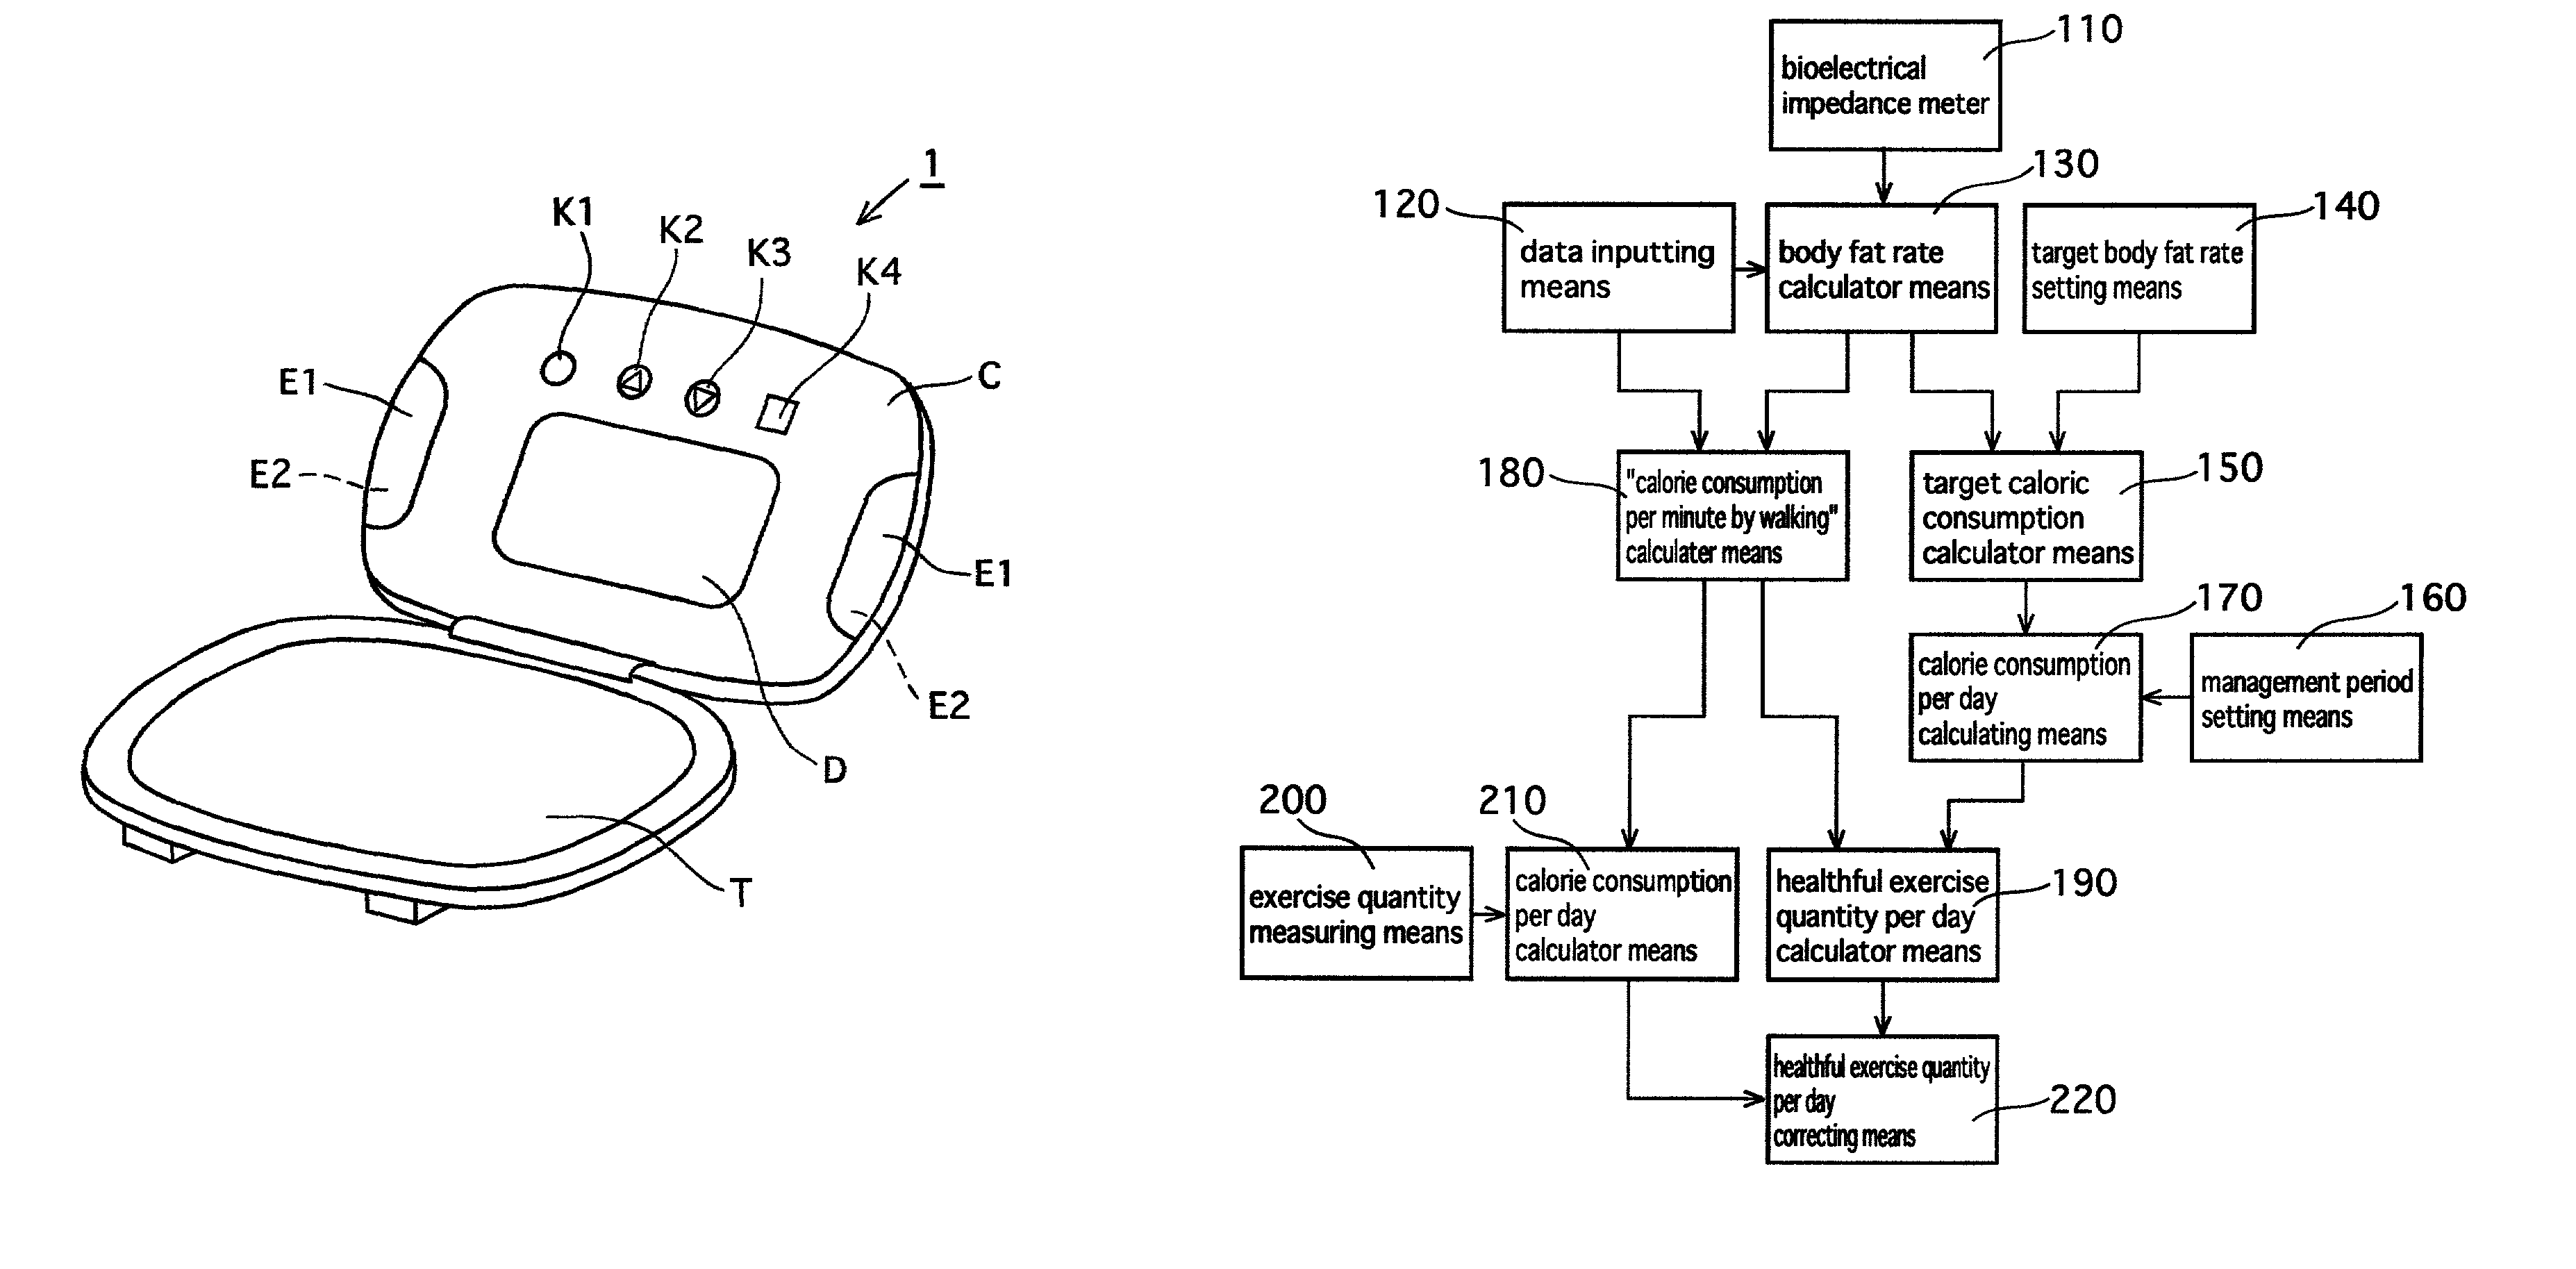 Health amount-of-exercise managing device